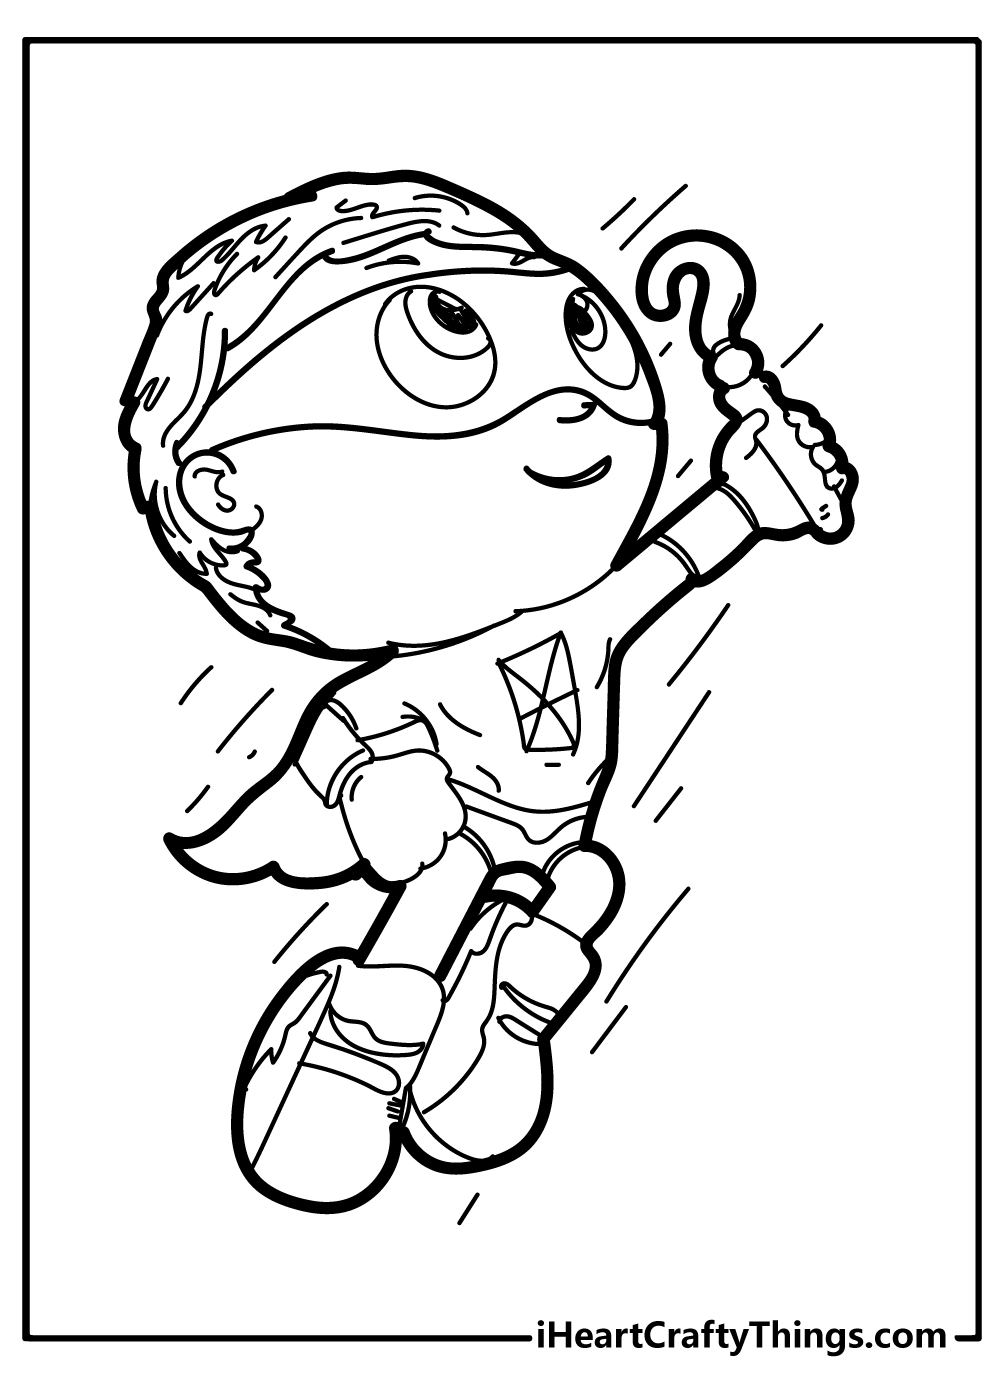 Super Coloring Pages free pdf download